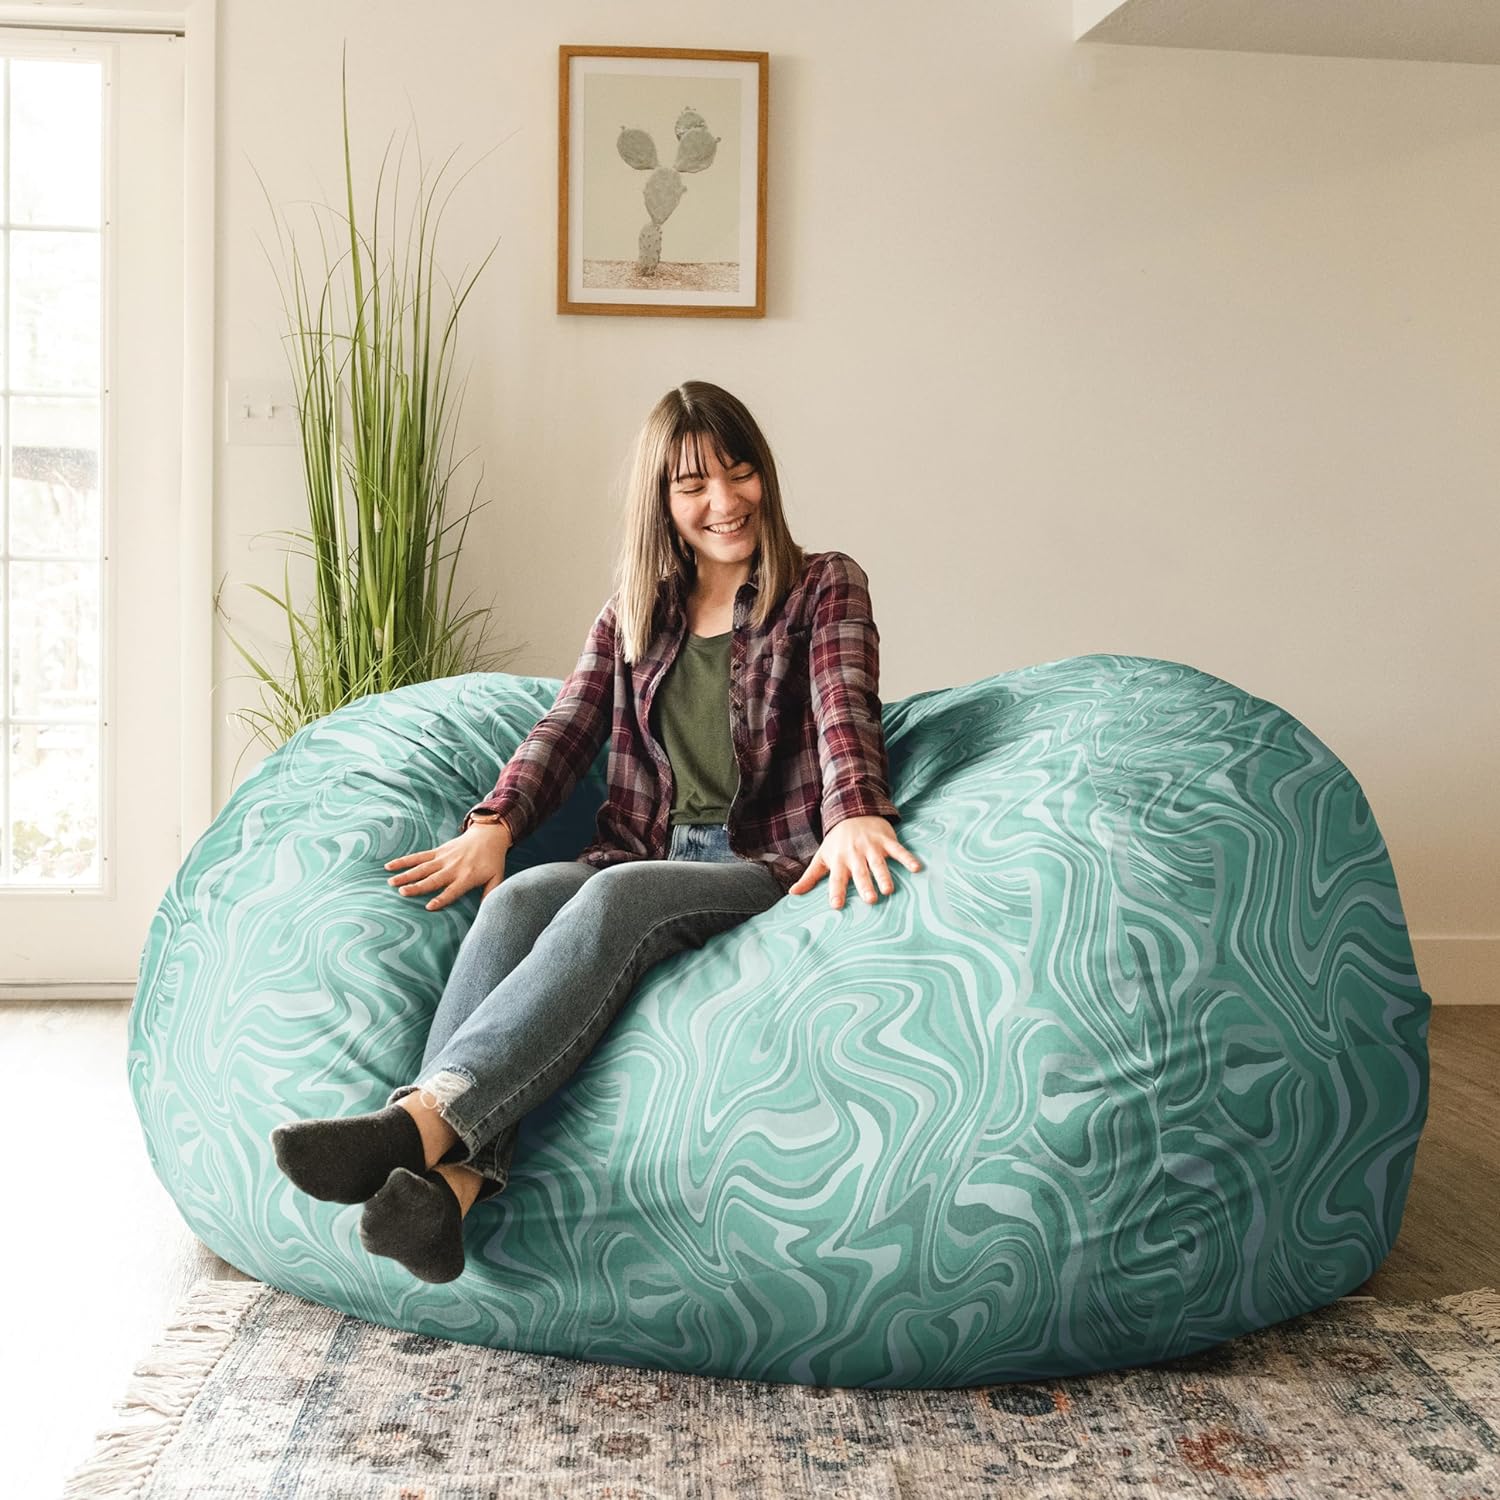 Big Joe Foam Filled Bean Bag Chair with Removable Cover